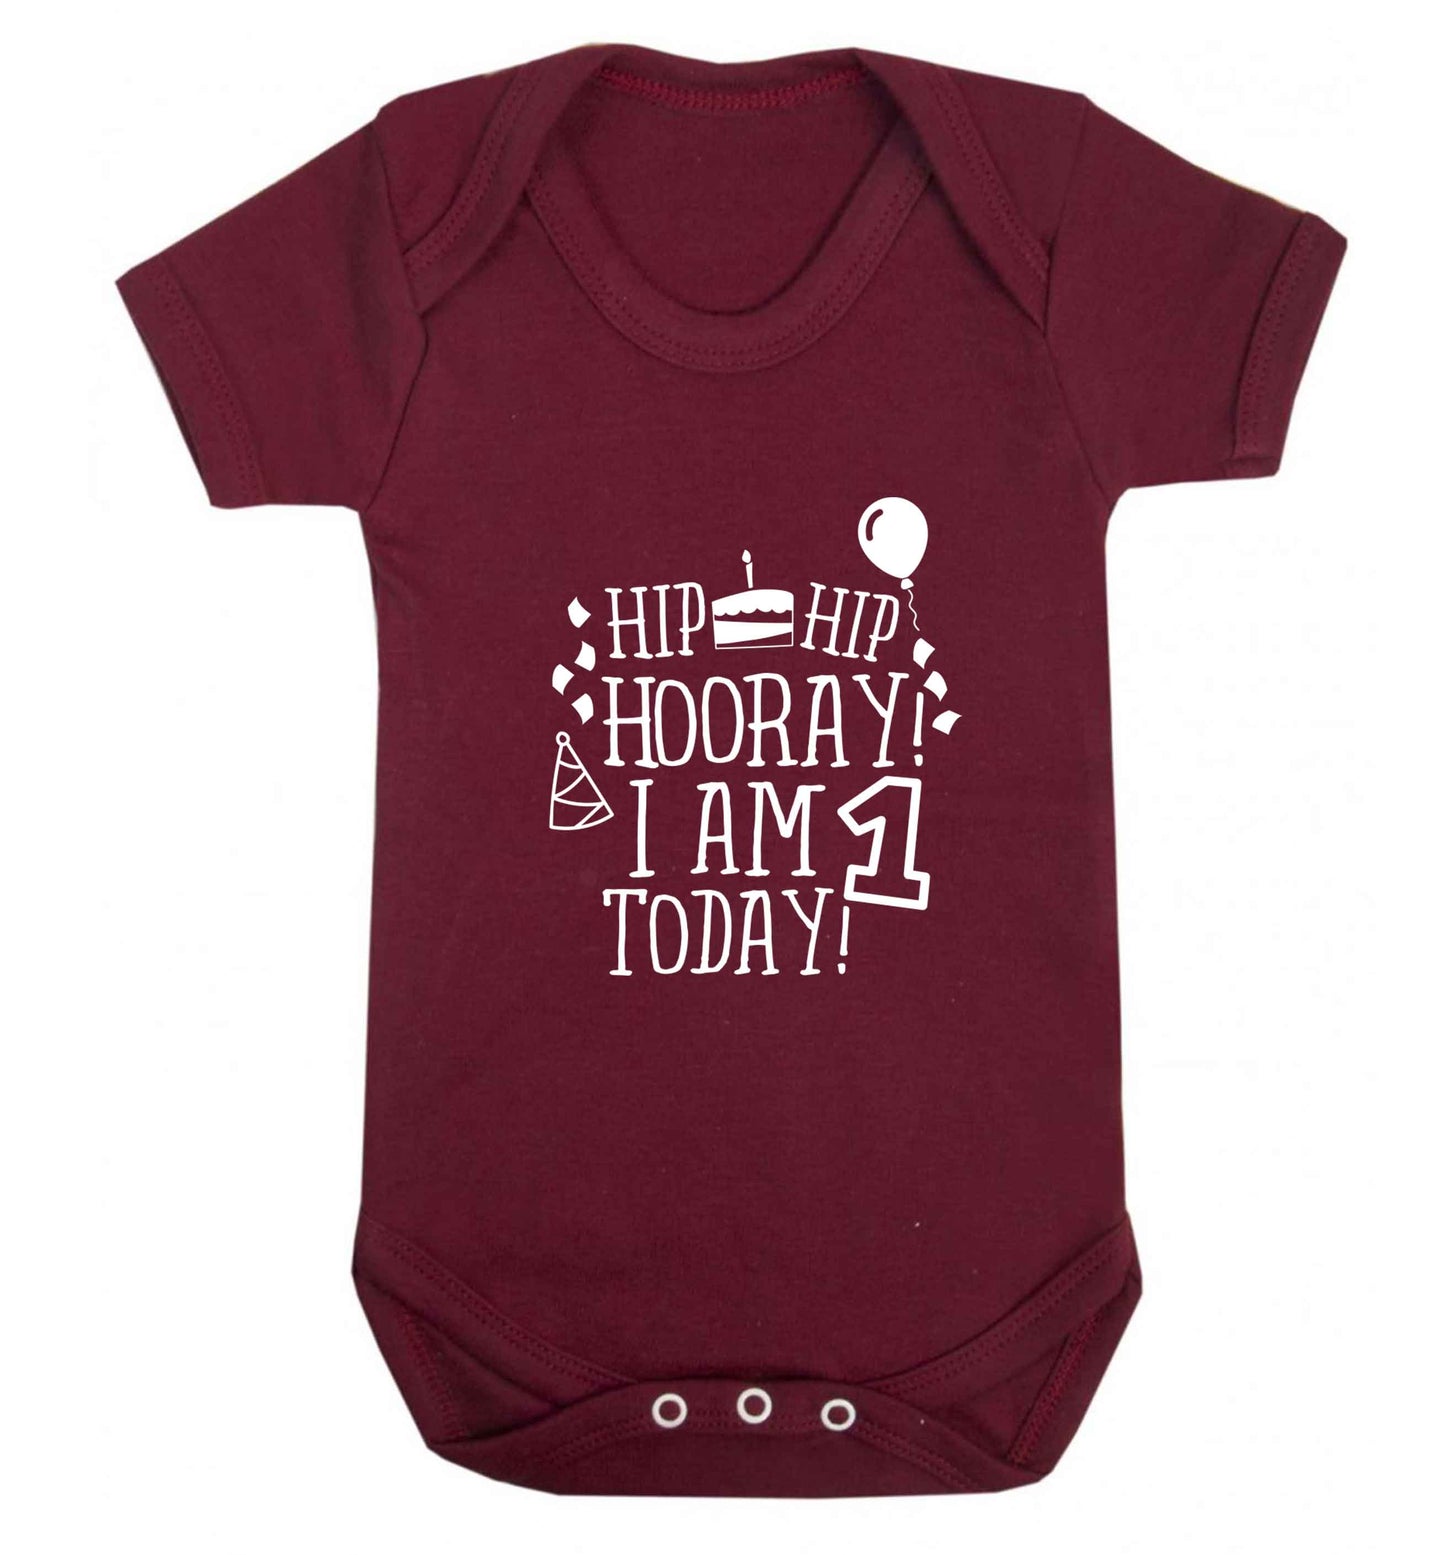 You're 2 Today baby vest maroon 18-24 months